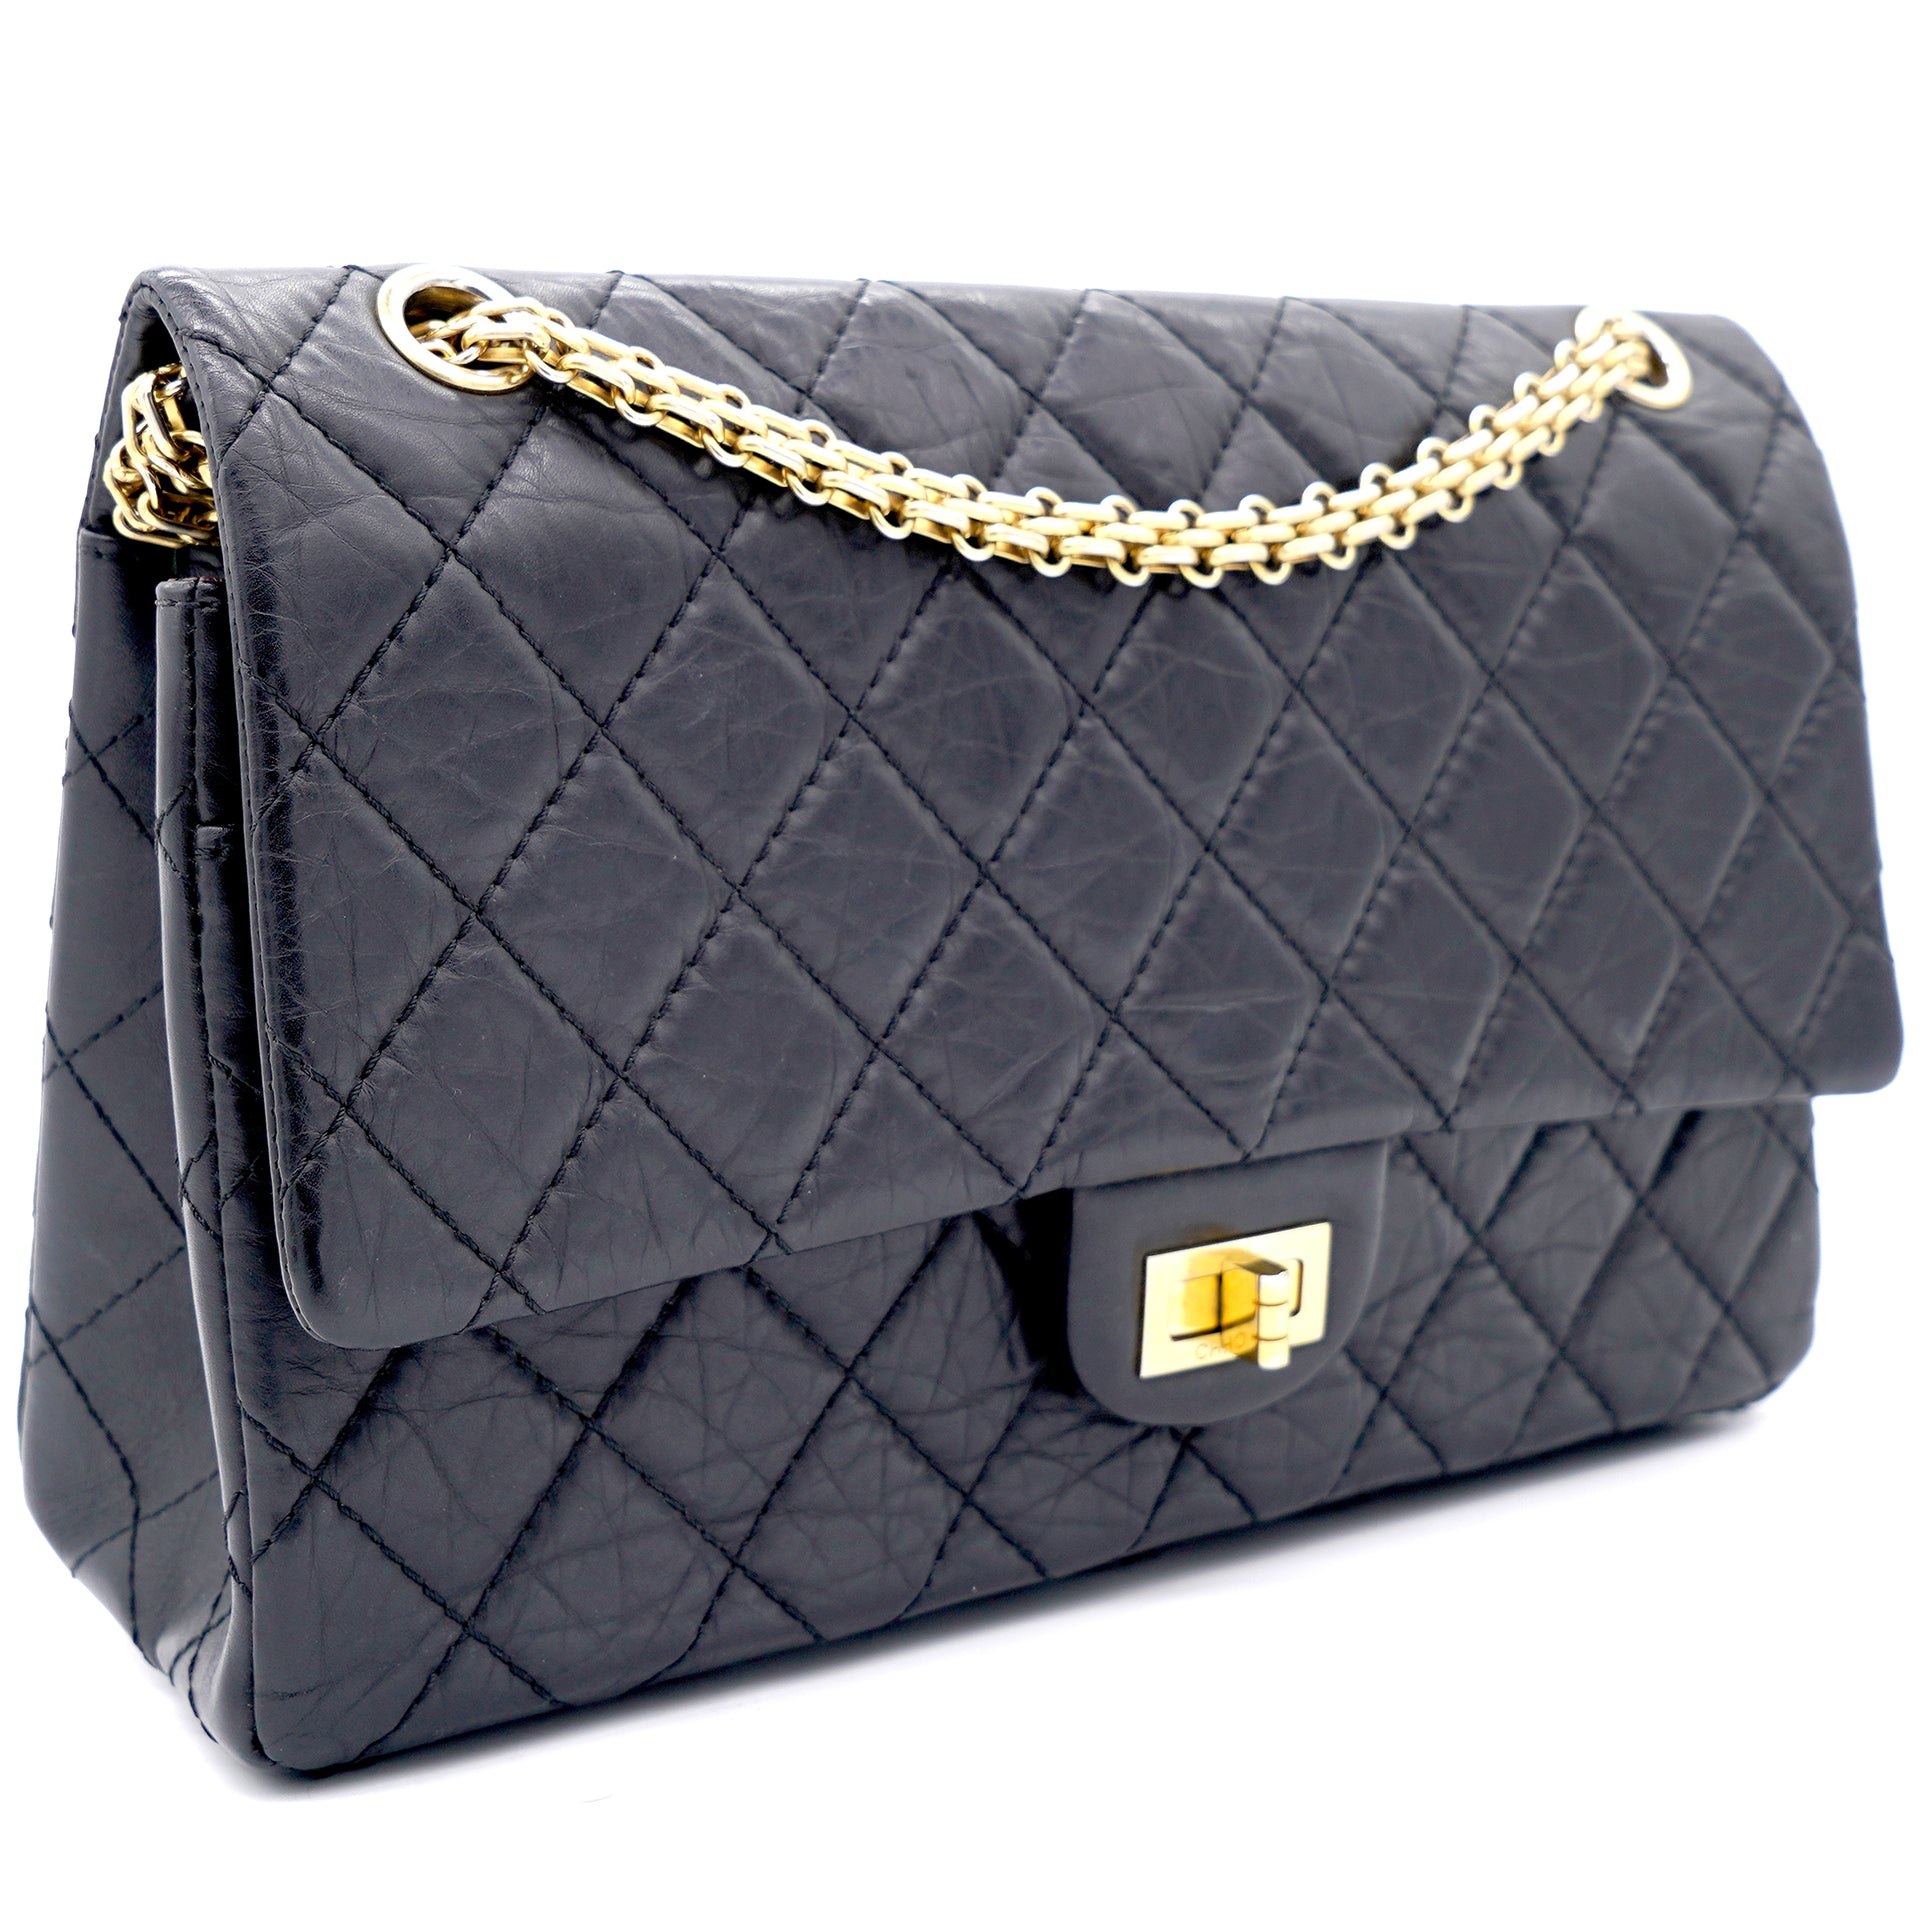 Chanel Black Quilted Crinkled Leather 226 Classic Reissue 255 Flap Bag   STYLISHTOP